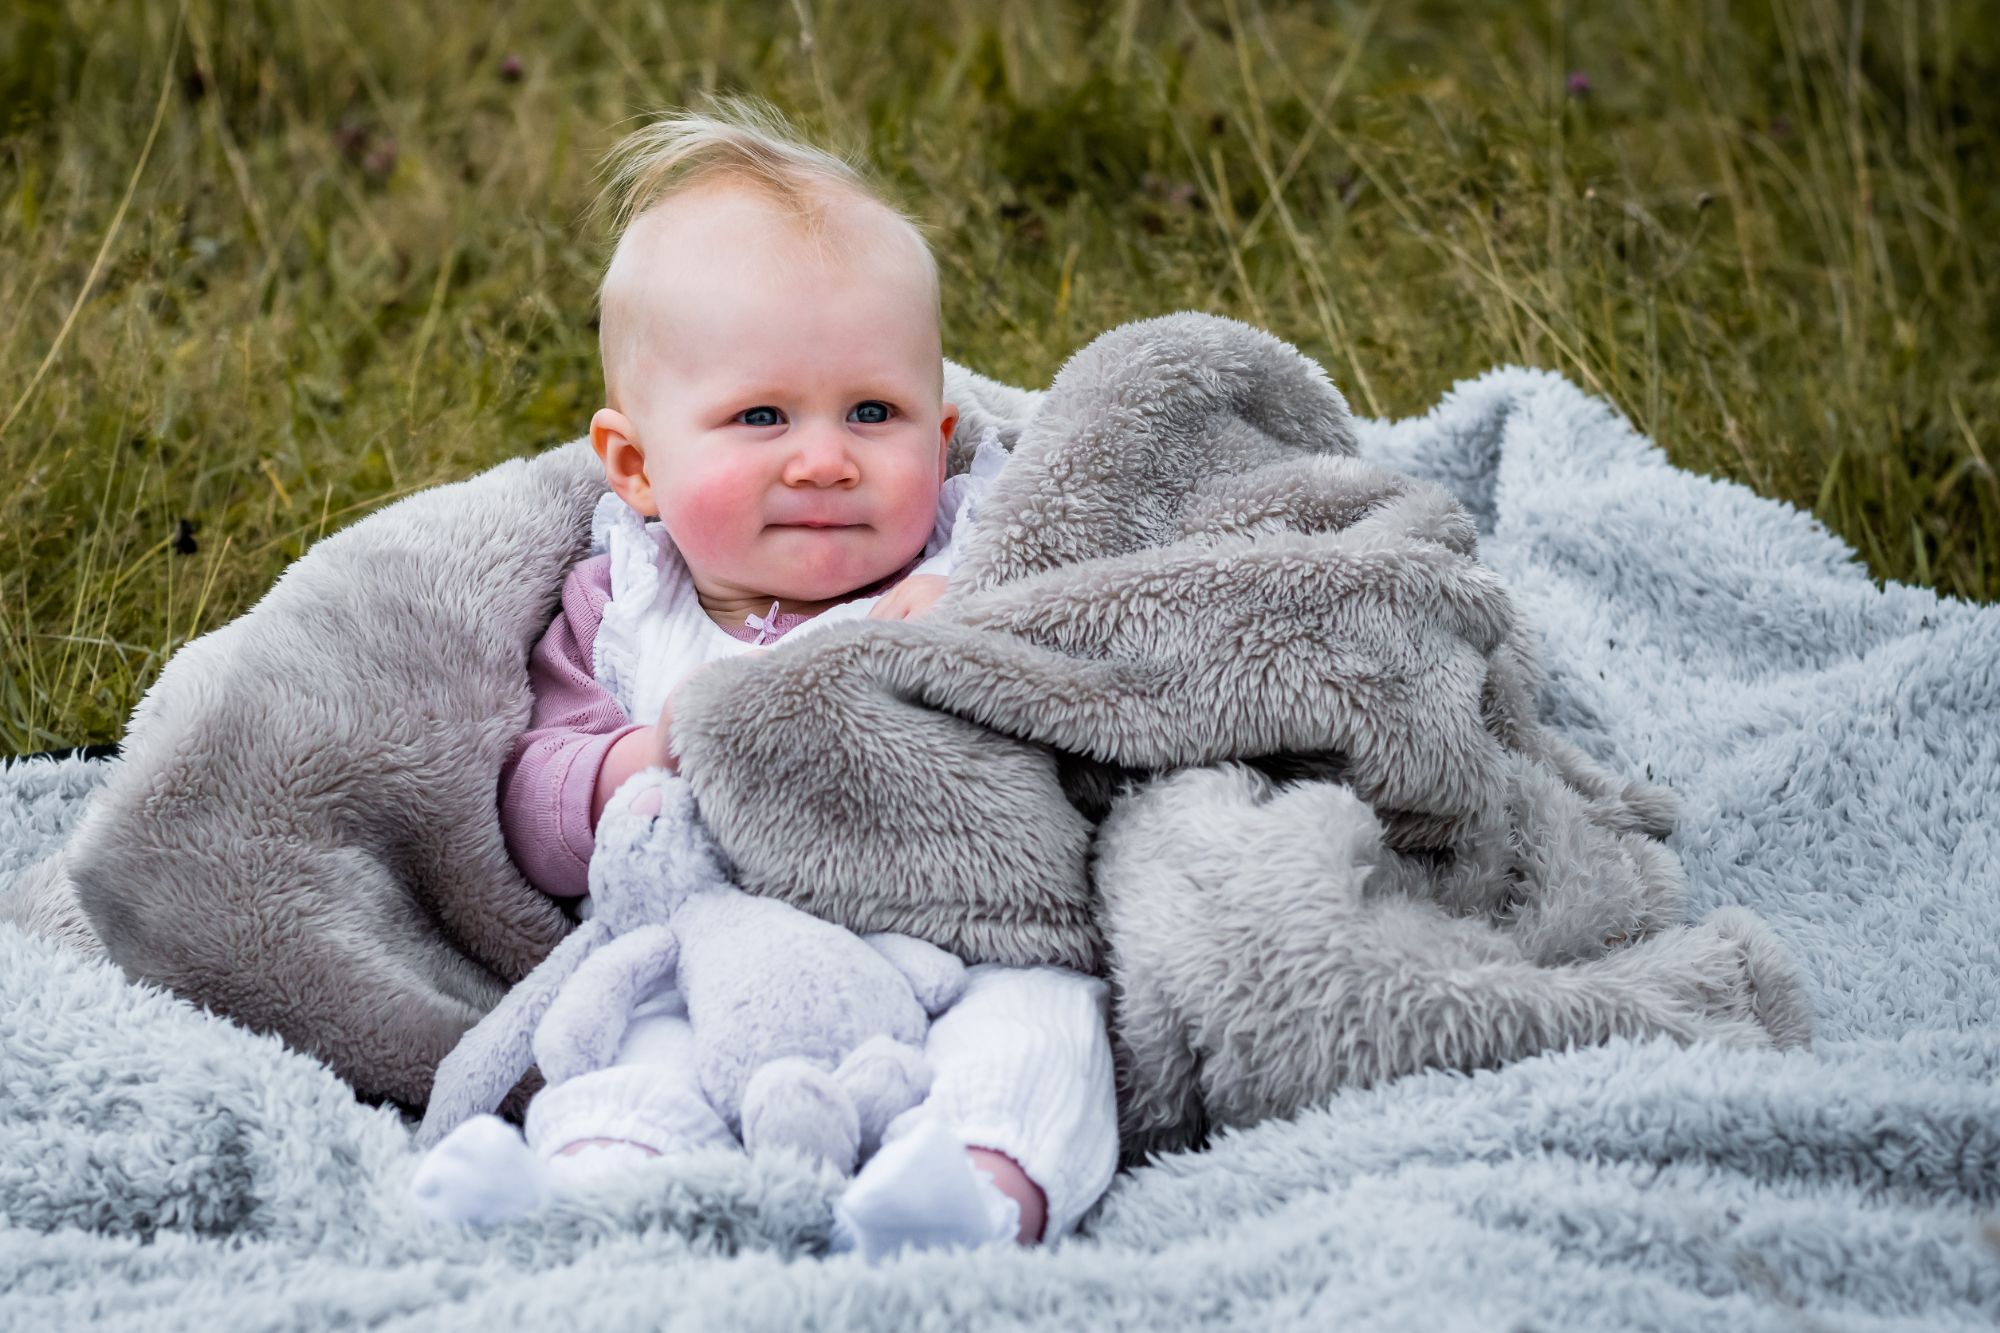 A little girl wraps herself in a blanket, the wind is blowing her hair and she has her bunny teddy on her legs. She's only six months old